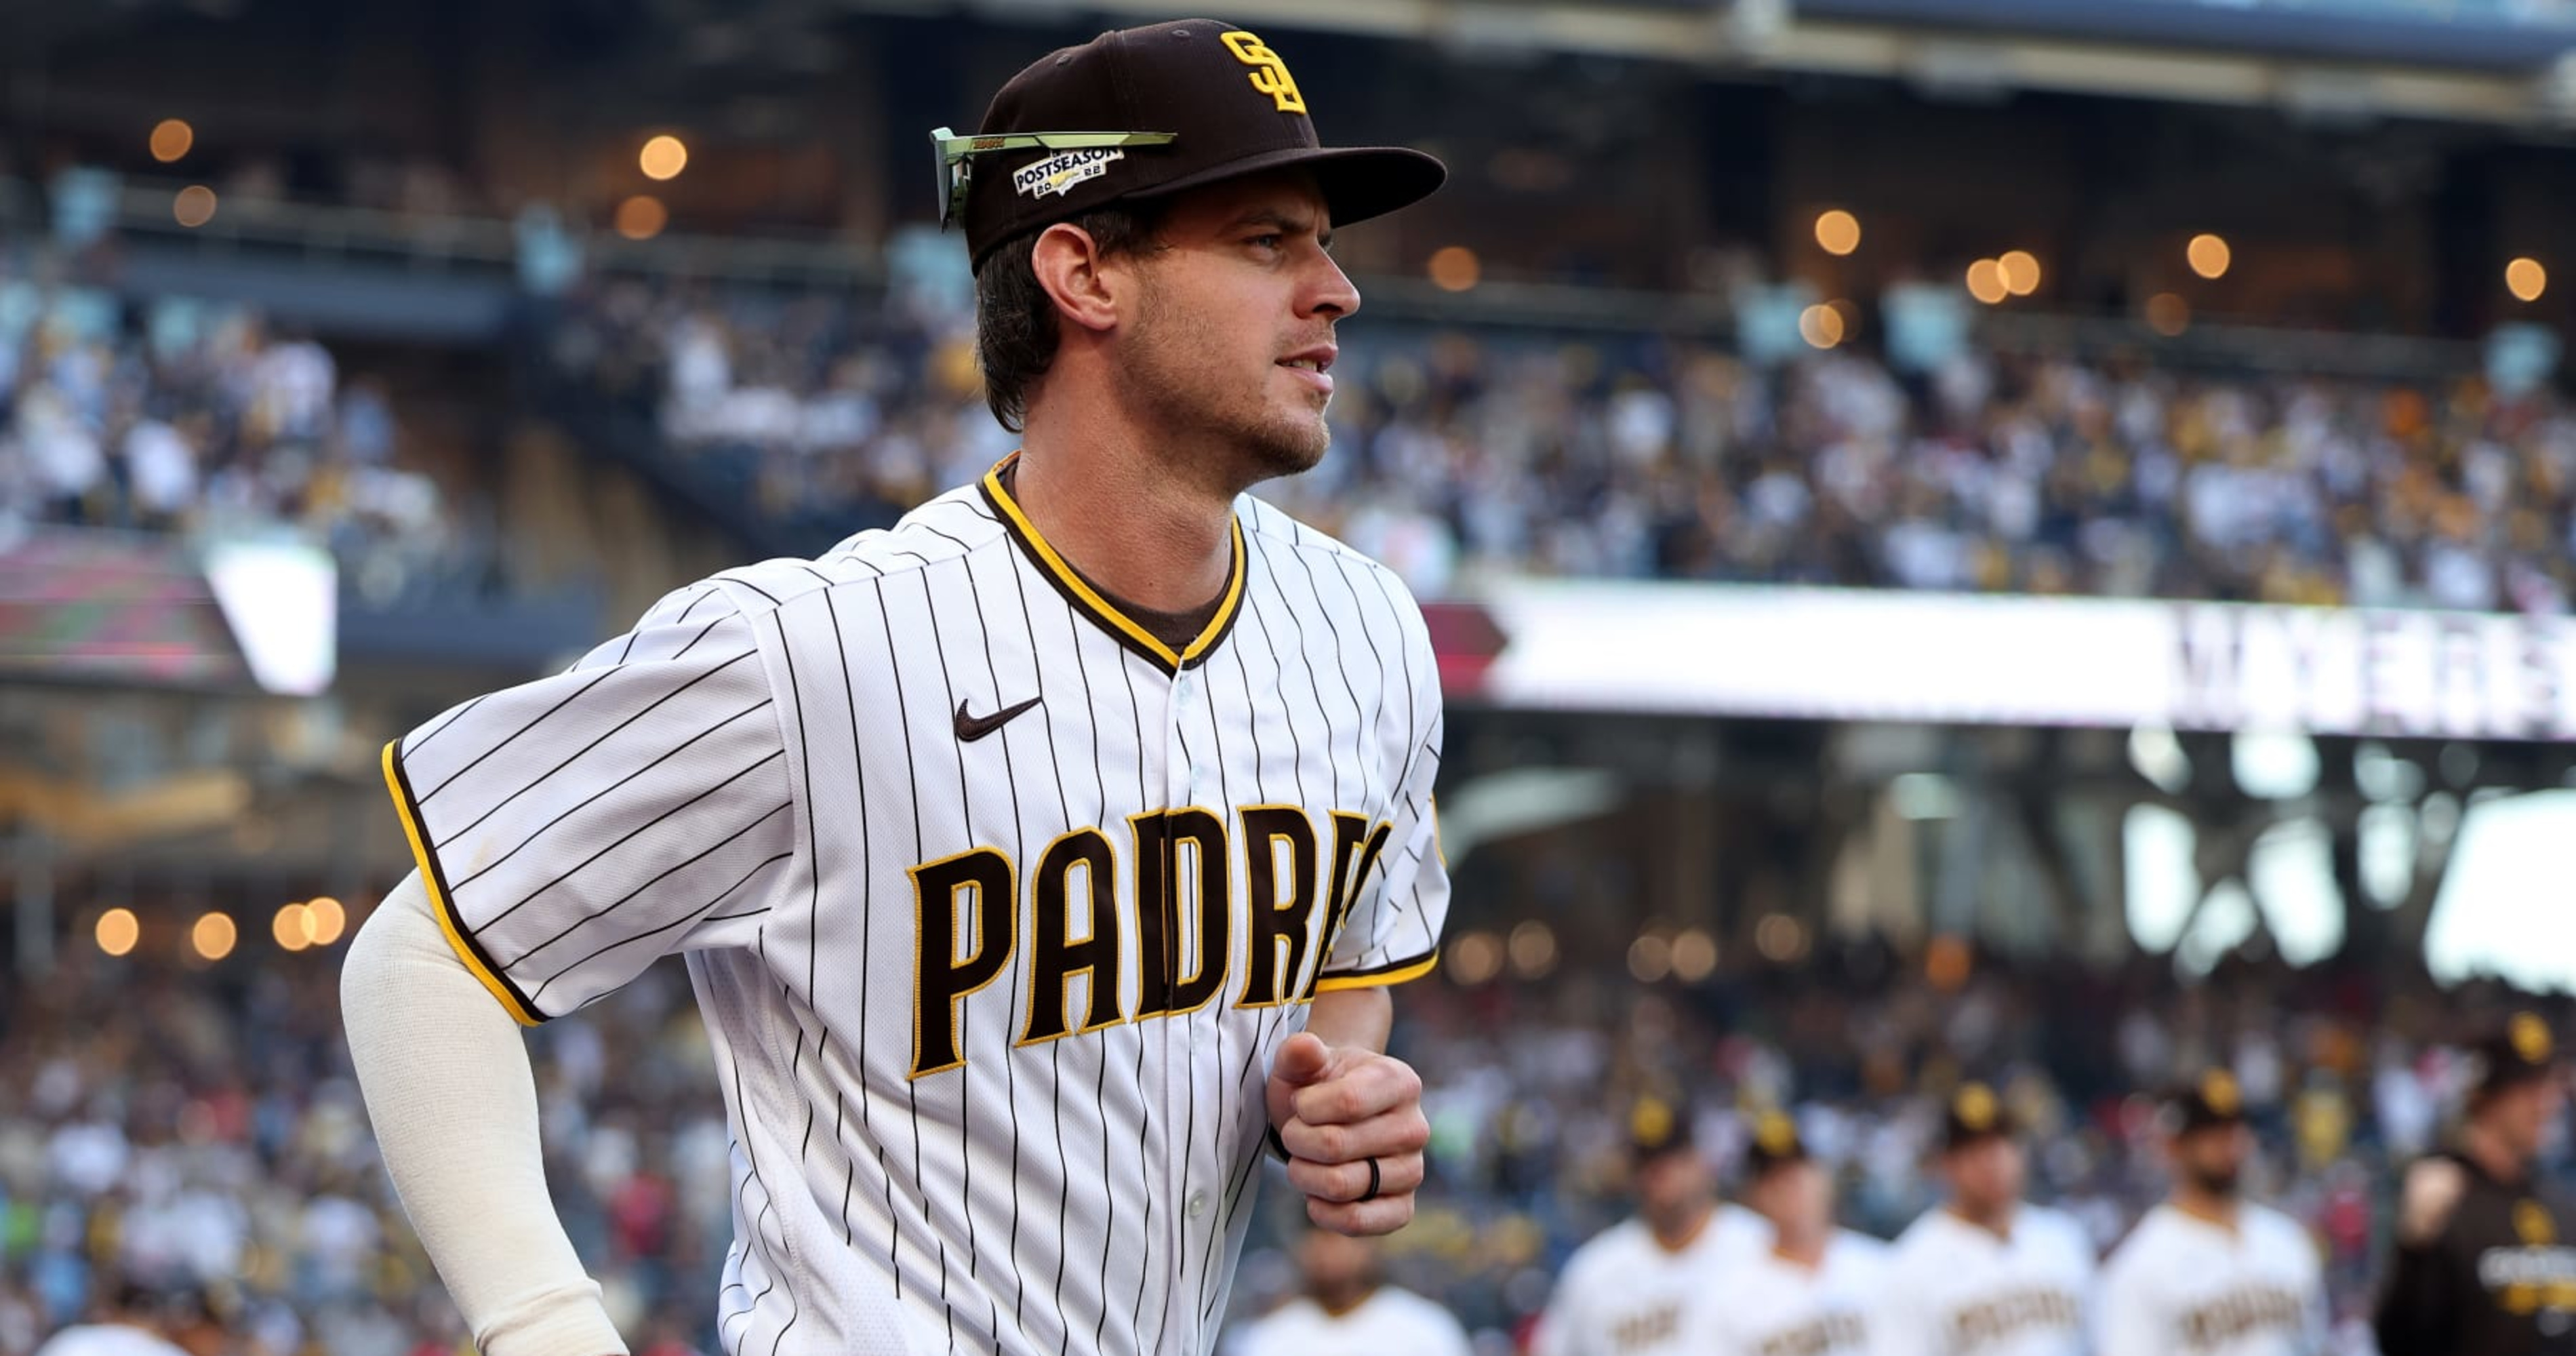 Wil Myers and his wife bought Padres fans shots after beating Dodgers